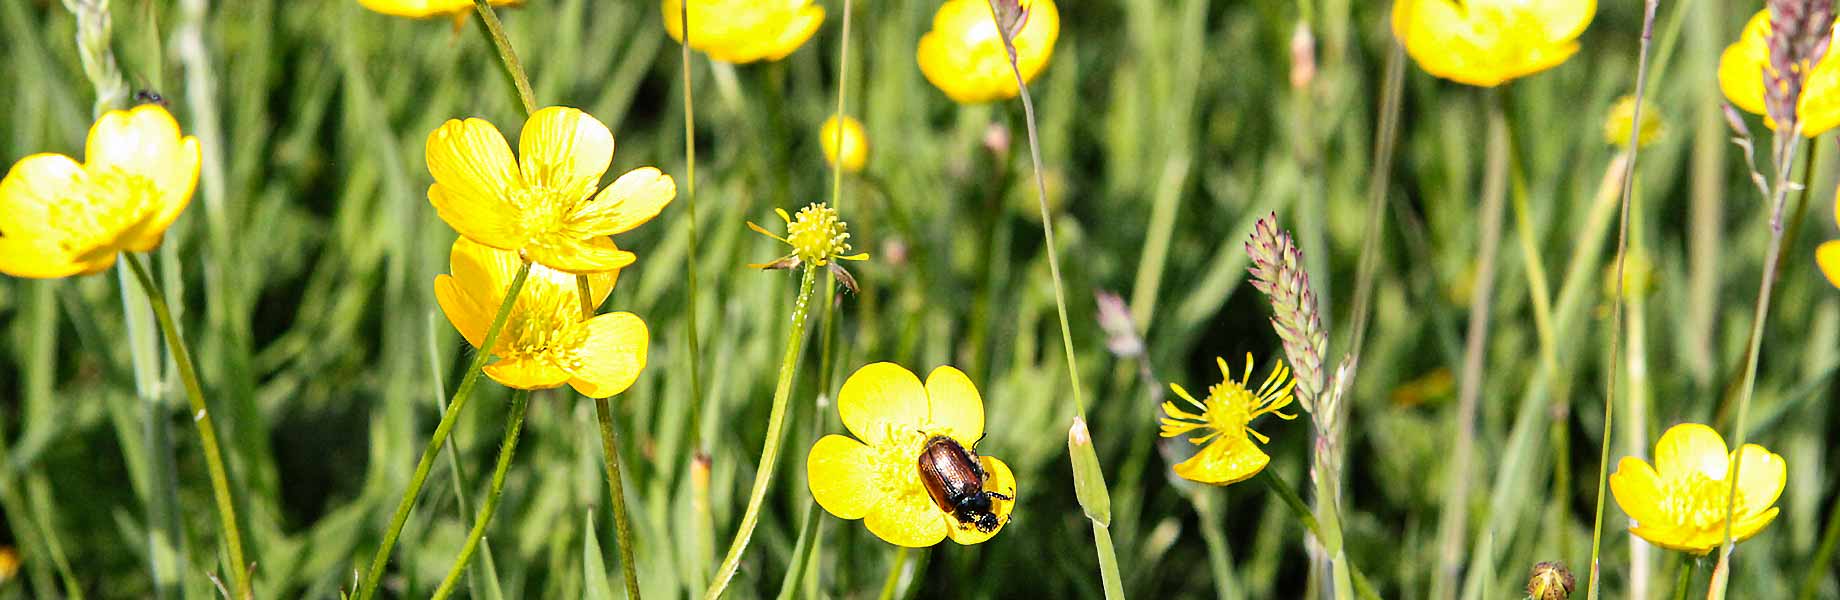 Buttercups in grass meadow with beetle